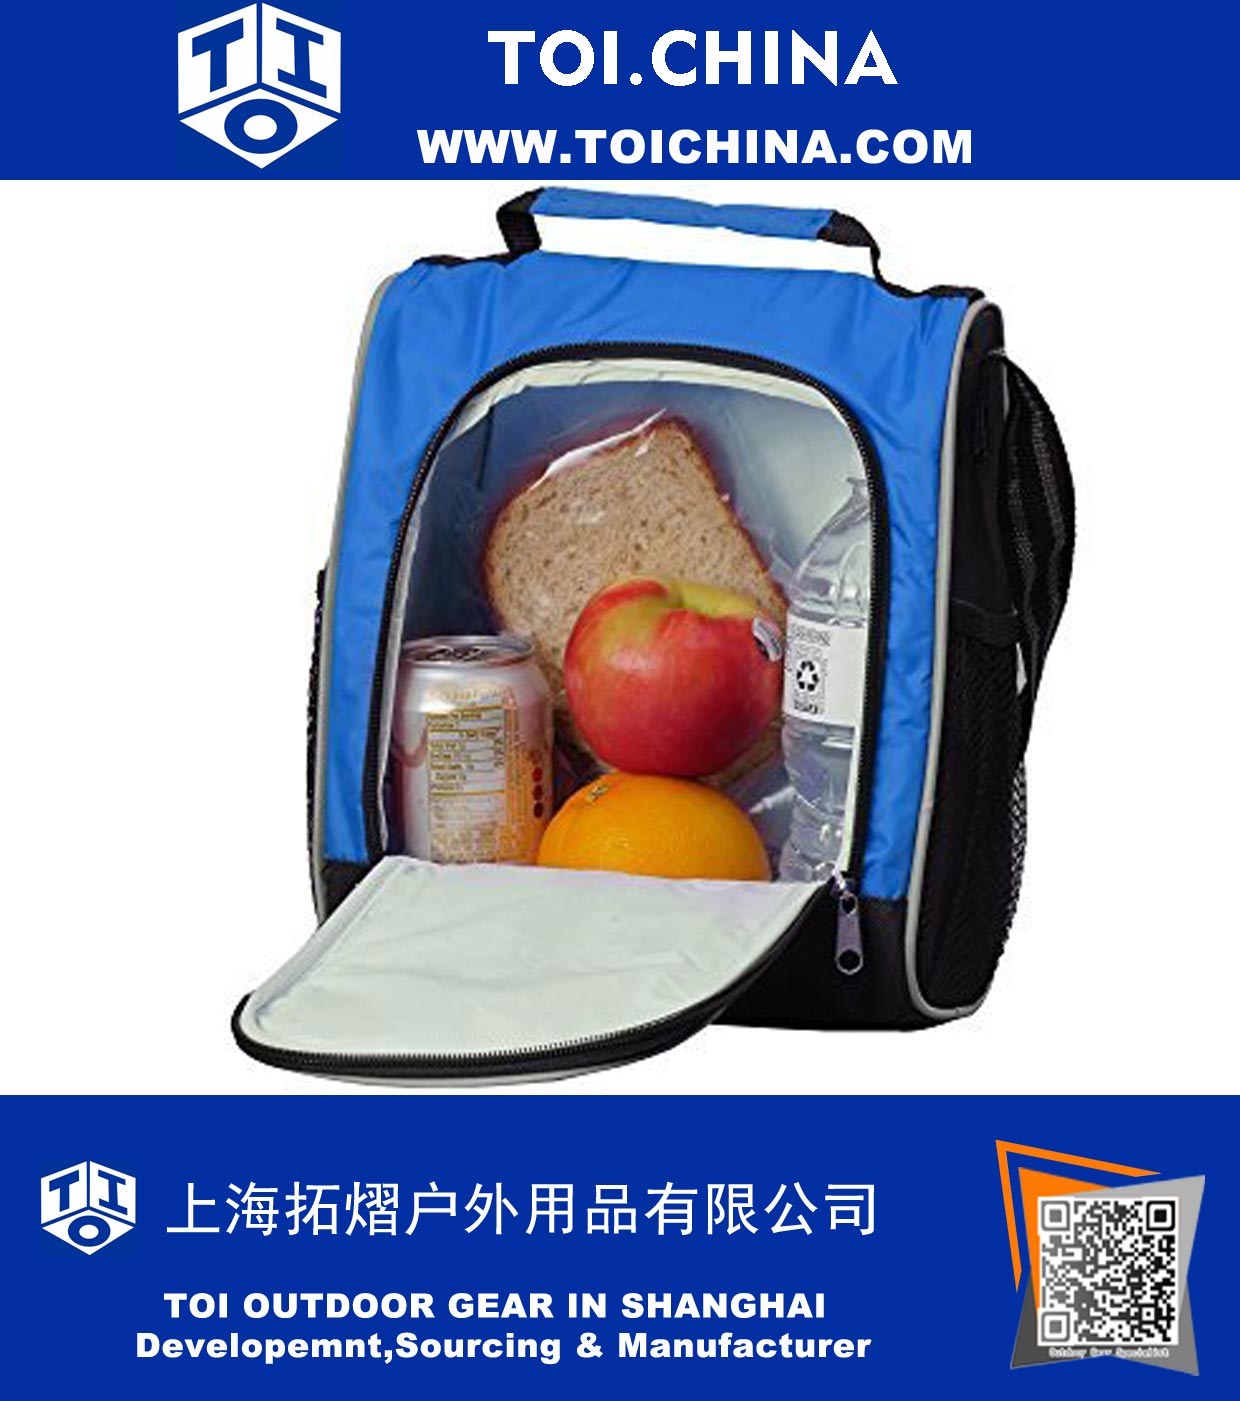 Lunch boxes For Kids Shoulder Strap Blue Reusable Bags for Boys Girls This lunch box for school can hold at least one sandwich, one 12 oz drink and 2 pieces of fruit